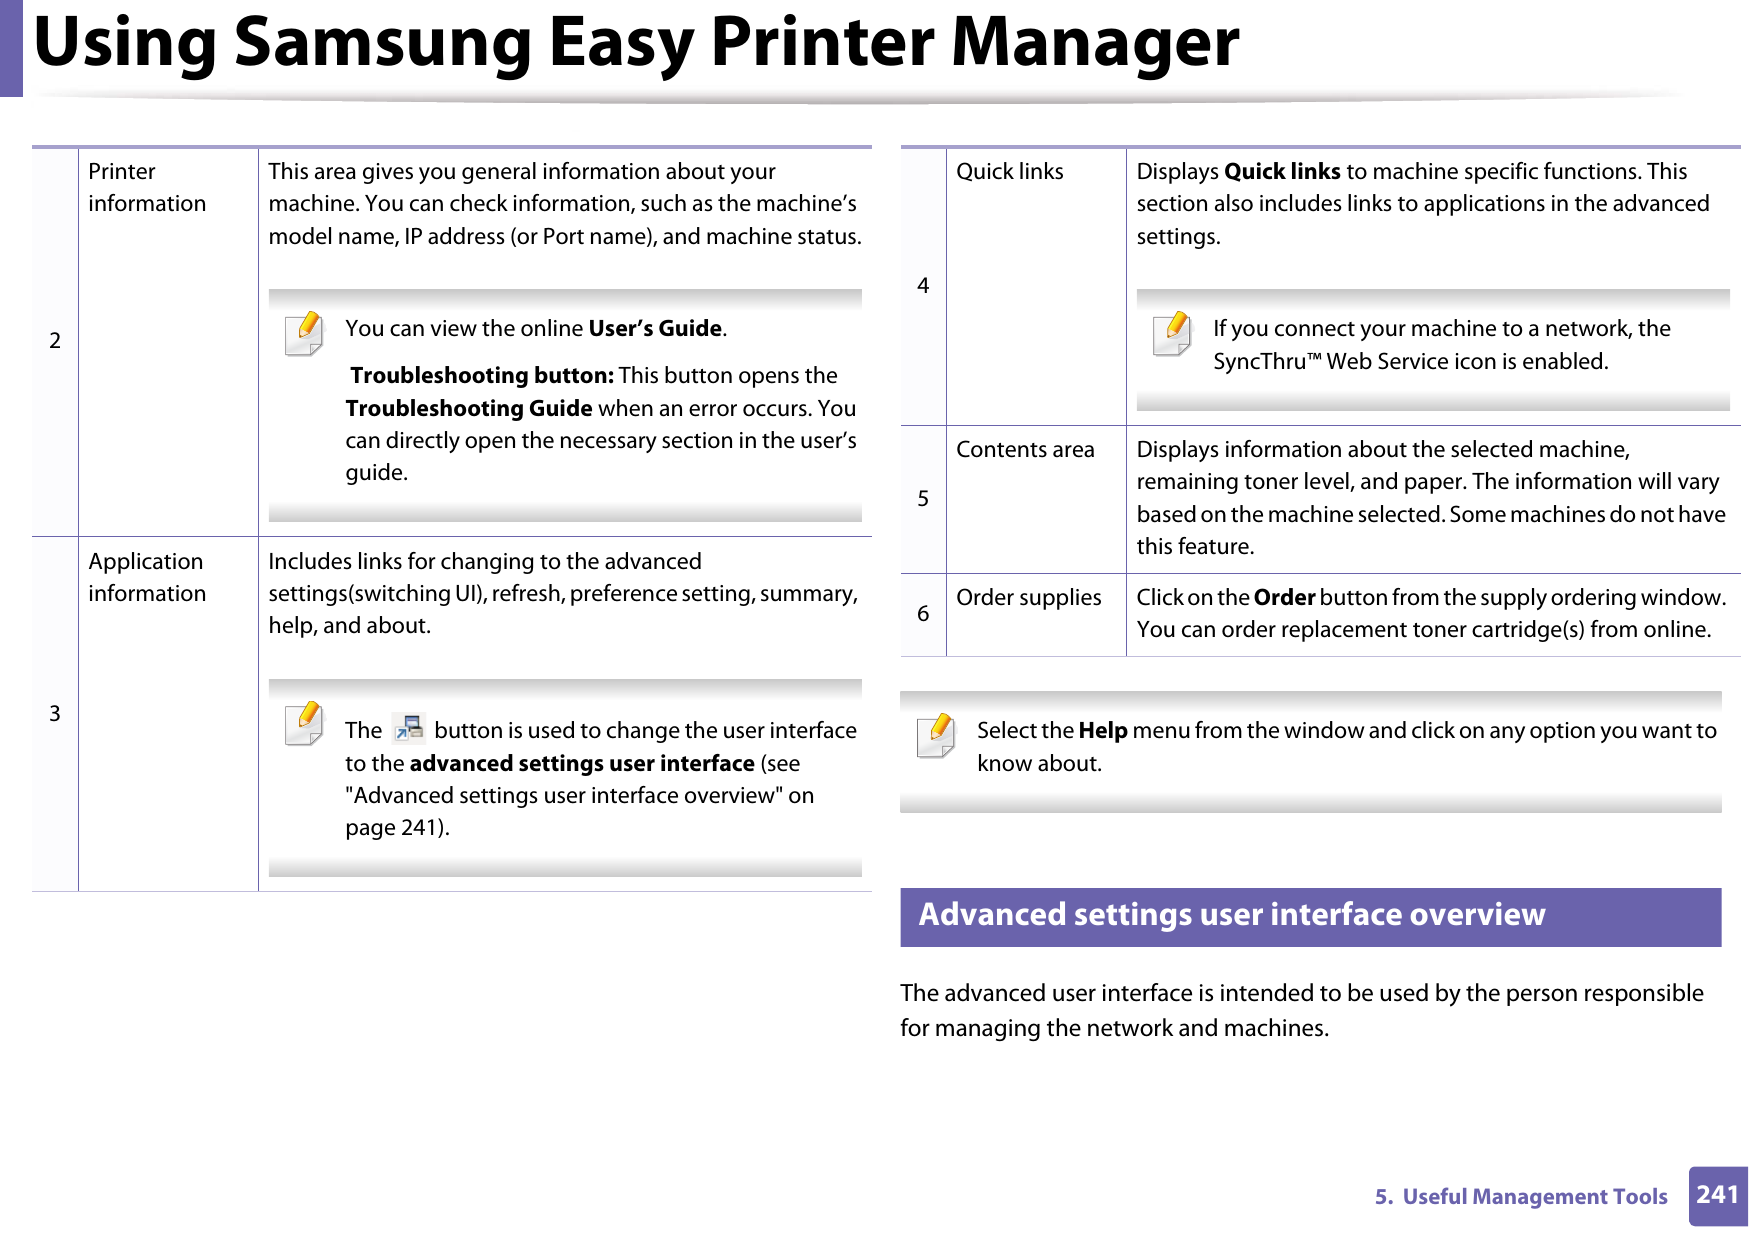 Using Samsung Easy Printer Manager2415.  Useful Management Tools Select the Help menu from the window and click on any option you want to know about.  6 Advanced settings user interface overviewThe advanced user interface is intended to be used by the person responsible for managing the network and machines.2Printer informationThis area gives you general information about your machine. You can check information, such as the machine’s model name, IP address (or Port name), and machine status. You can view the online User’s Guide. Troubleshooting button: This button opens the Troubleshooting Guide when an error occurs. You can directly open the necessary section in the user’s guide.  3Application informationIncludes links for changing to the advanced settings(switching UI), refresh, preference setting, summary, help, and about. The   button is used to change the user interface to the advanced settings user interface (see &quot;Advanced settings user interface overview&quot; on page 241). 4Quick links Displays Quick links to machine specific functions. This section also includes links to applications in the advanced settings. If you connect your machine to a network, the SyncThru™ Web Service icon is enabled. 5Contents area Displays information about the selected machine, remaining toner level, and paper. The information will vary based on the machine selected. Some machines do not have this feature.6Order supplies Click on the Order button from the supply ordering window. You can order replacement toner cartridge(s) from online.